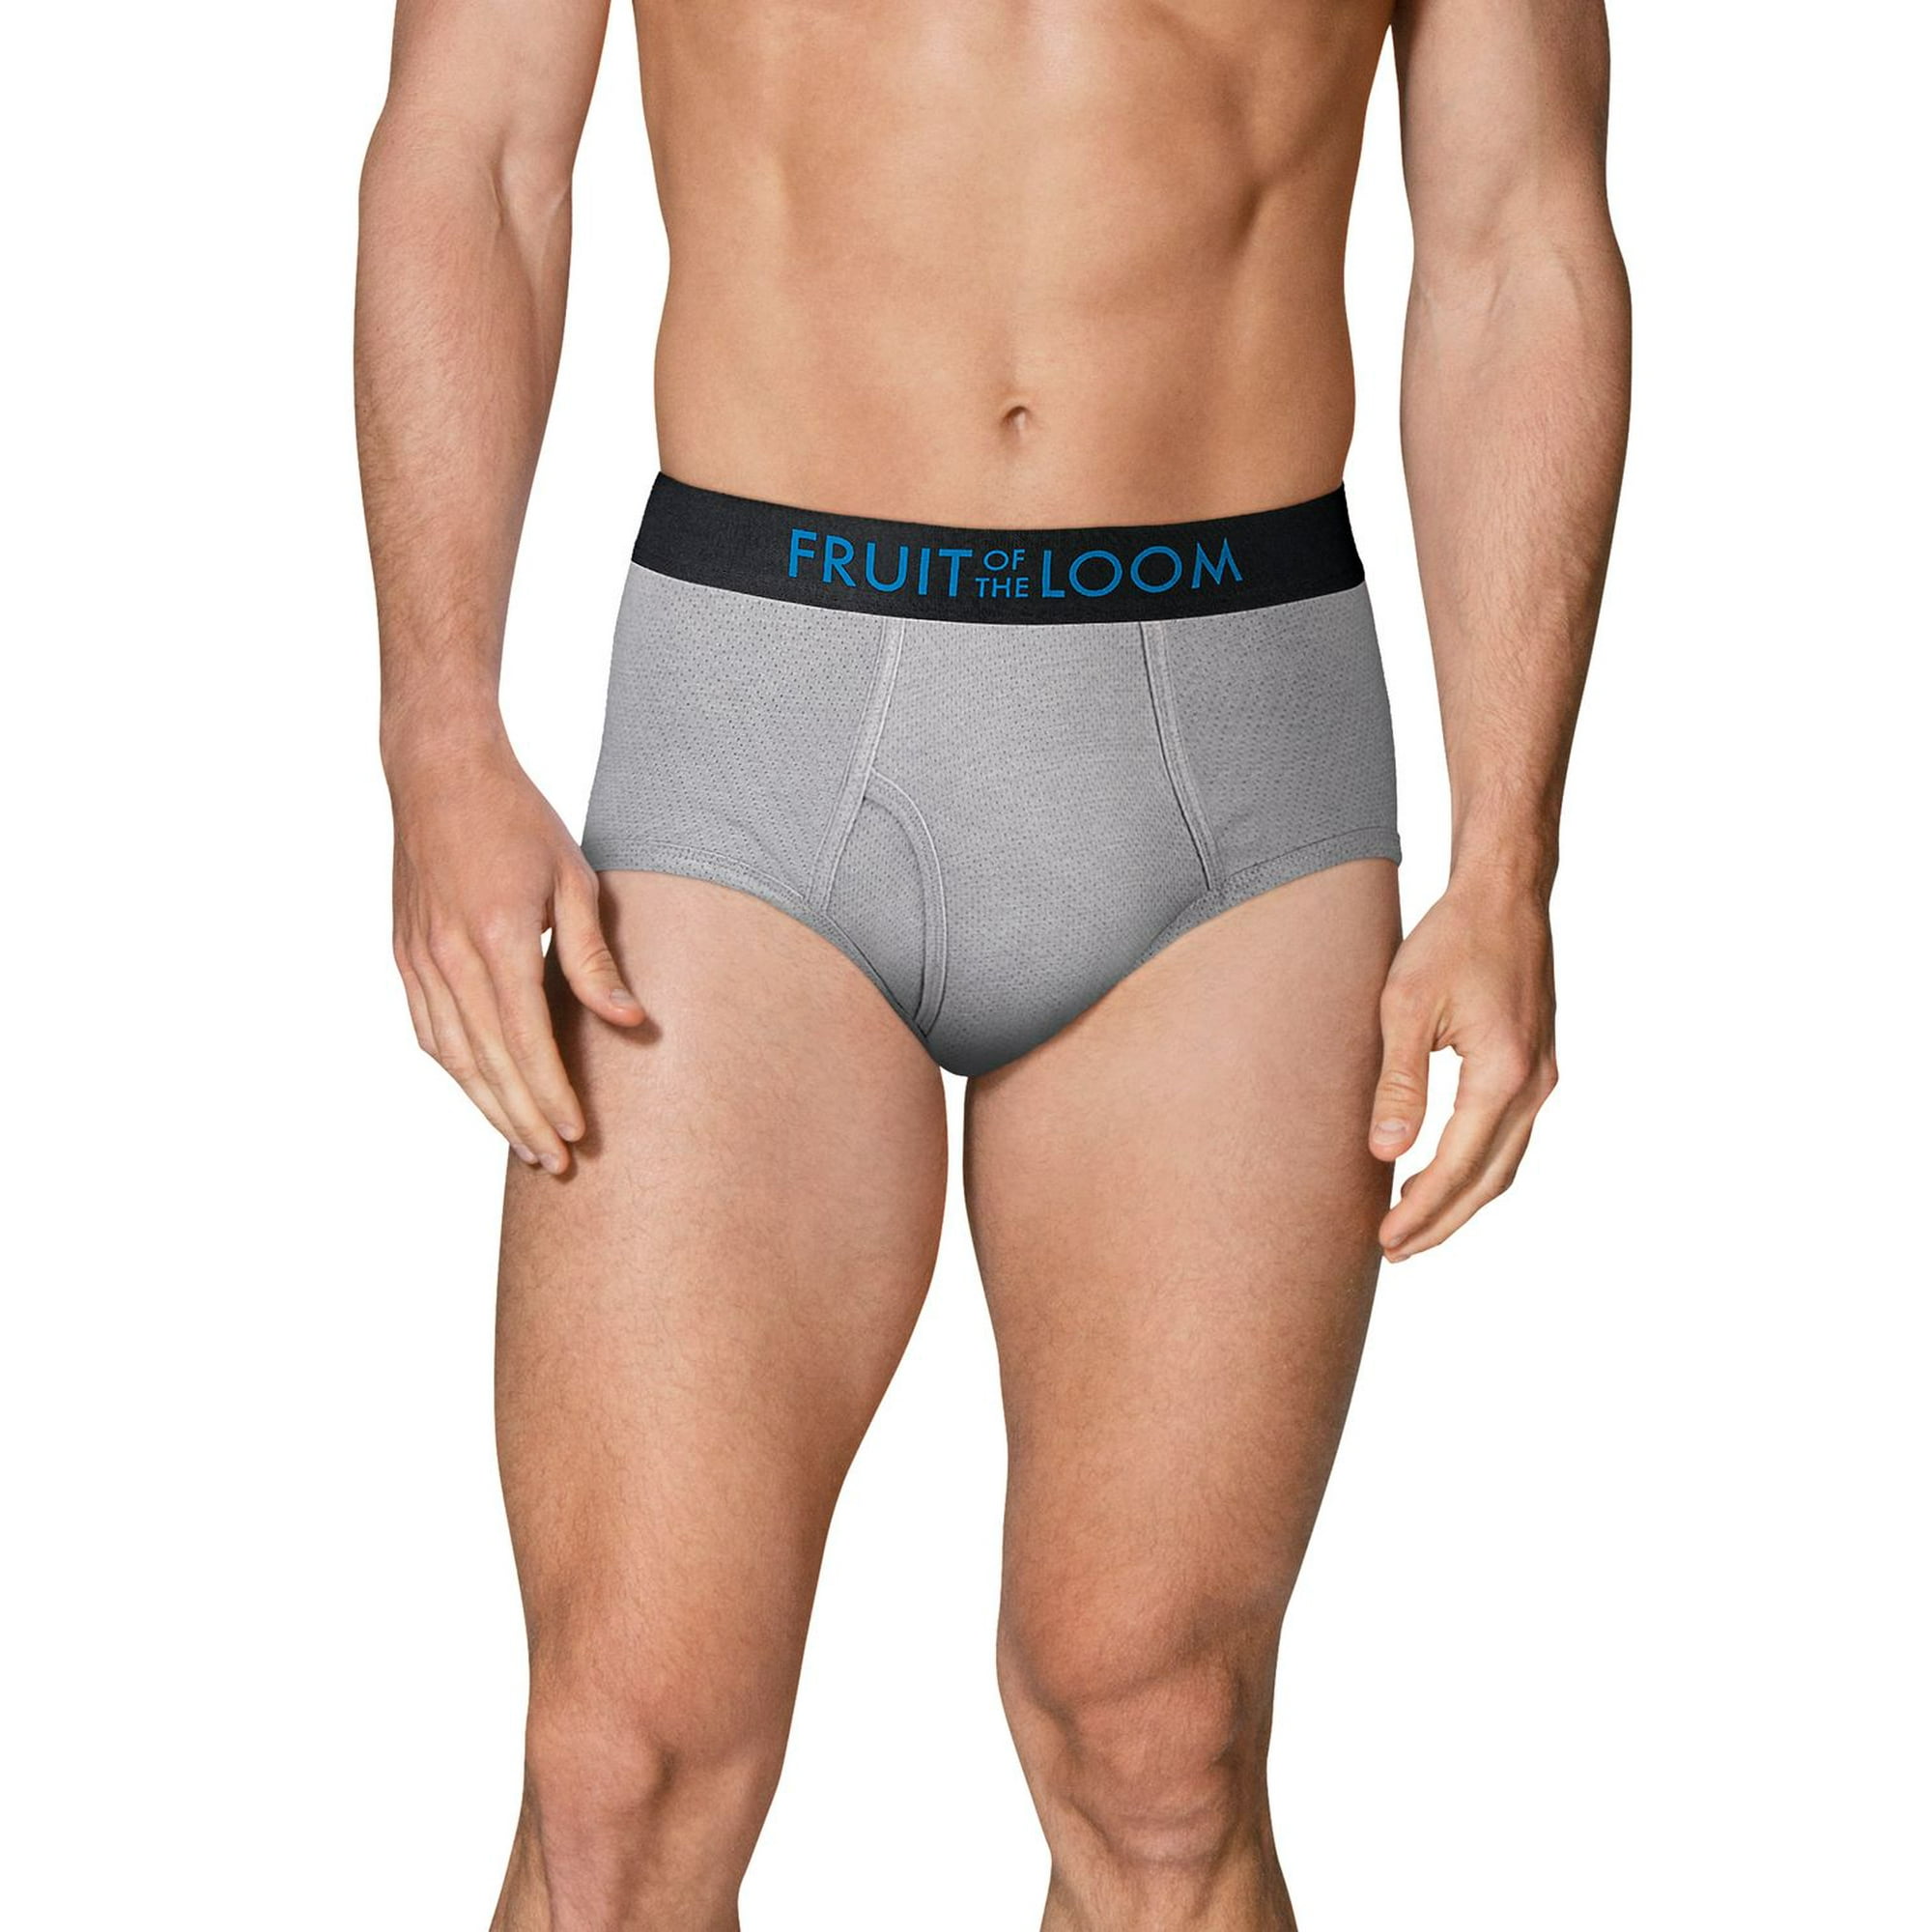 Fruit of the Loom Men's Breathable Brief, 4-Pack, Sizes S-XL